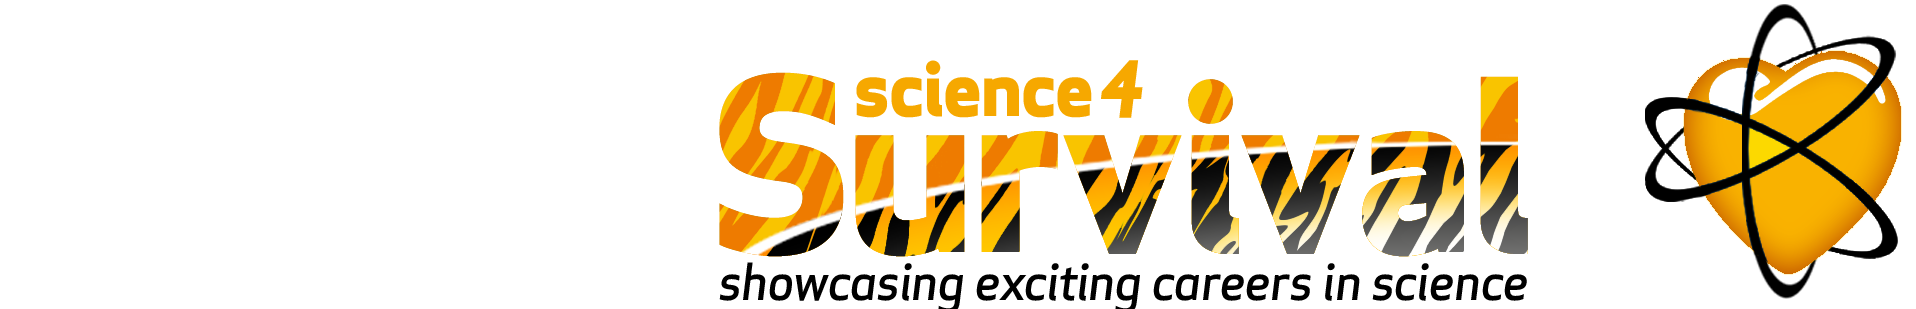 Science for Survival - showcasing exciting careers in science